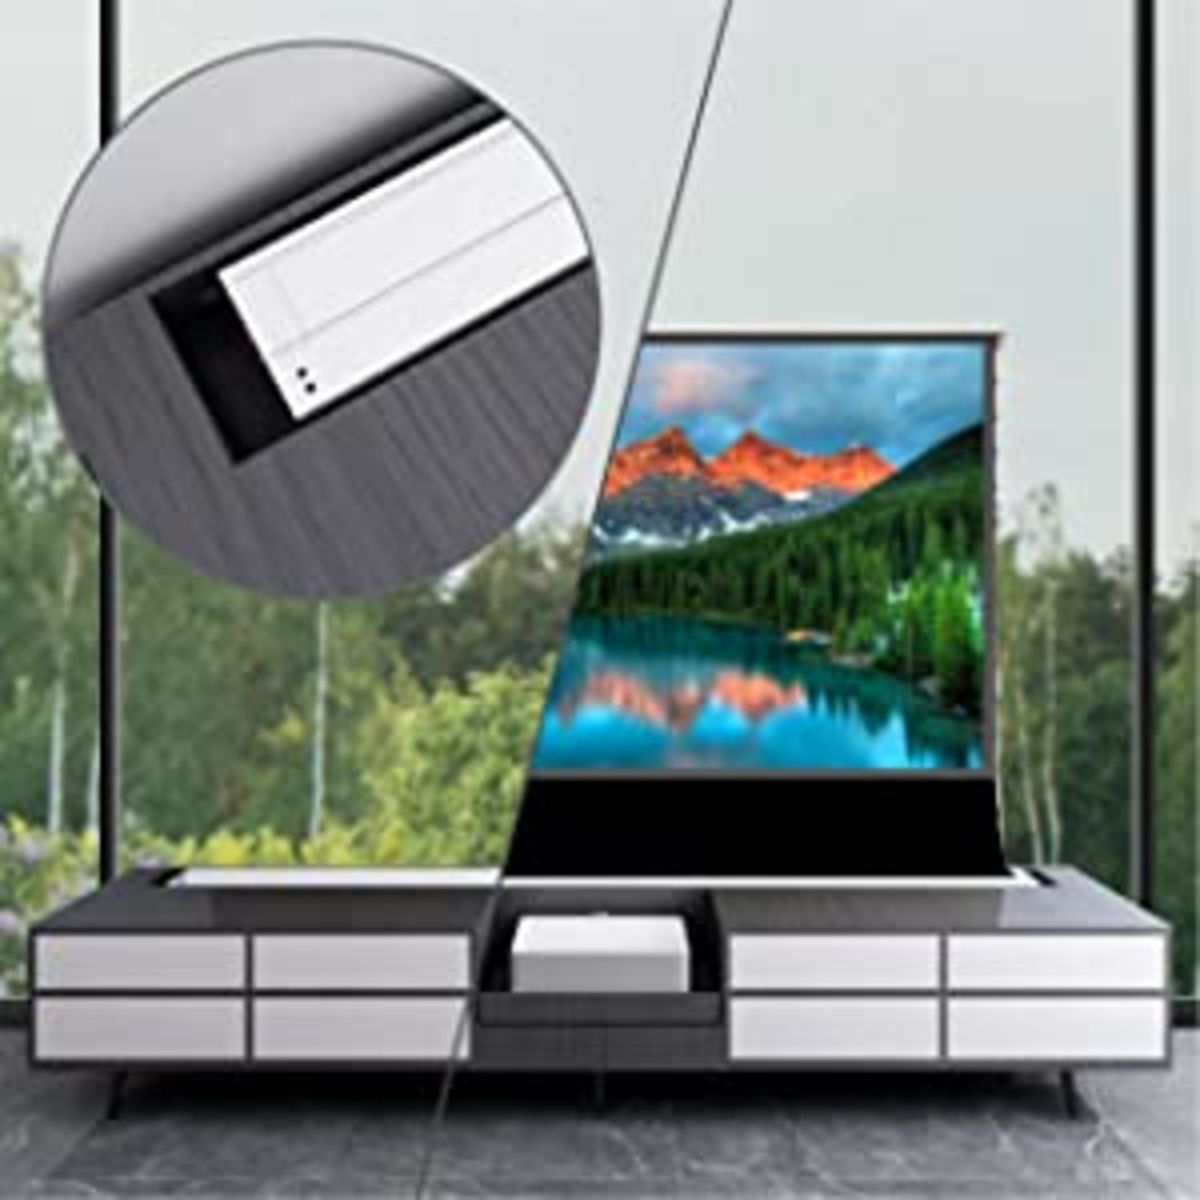 Vividstorm Motorized Floor Rising ALR Projector Screen Screen for Ultra  Short Throw Projectors 120 Inch with Acoustically Transparent Bottom Black  Border - VSDSTUST120HP - Vividstorm Vividstorm-VSDSTUST120HP